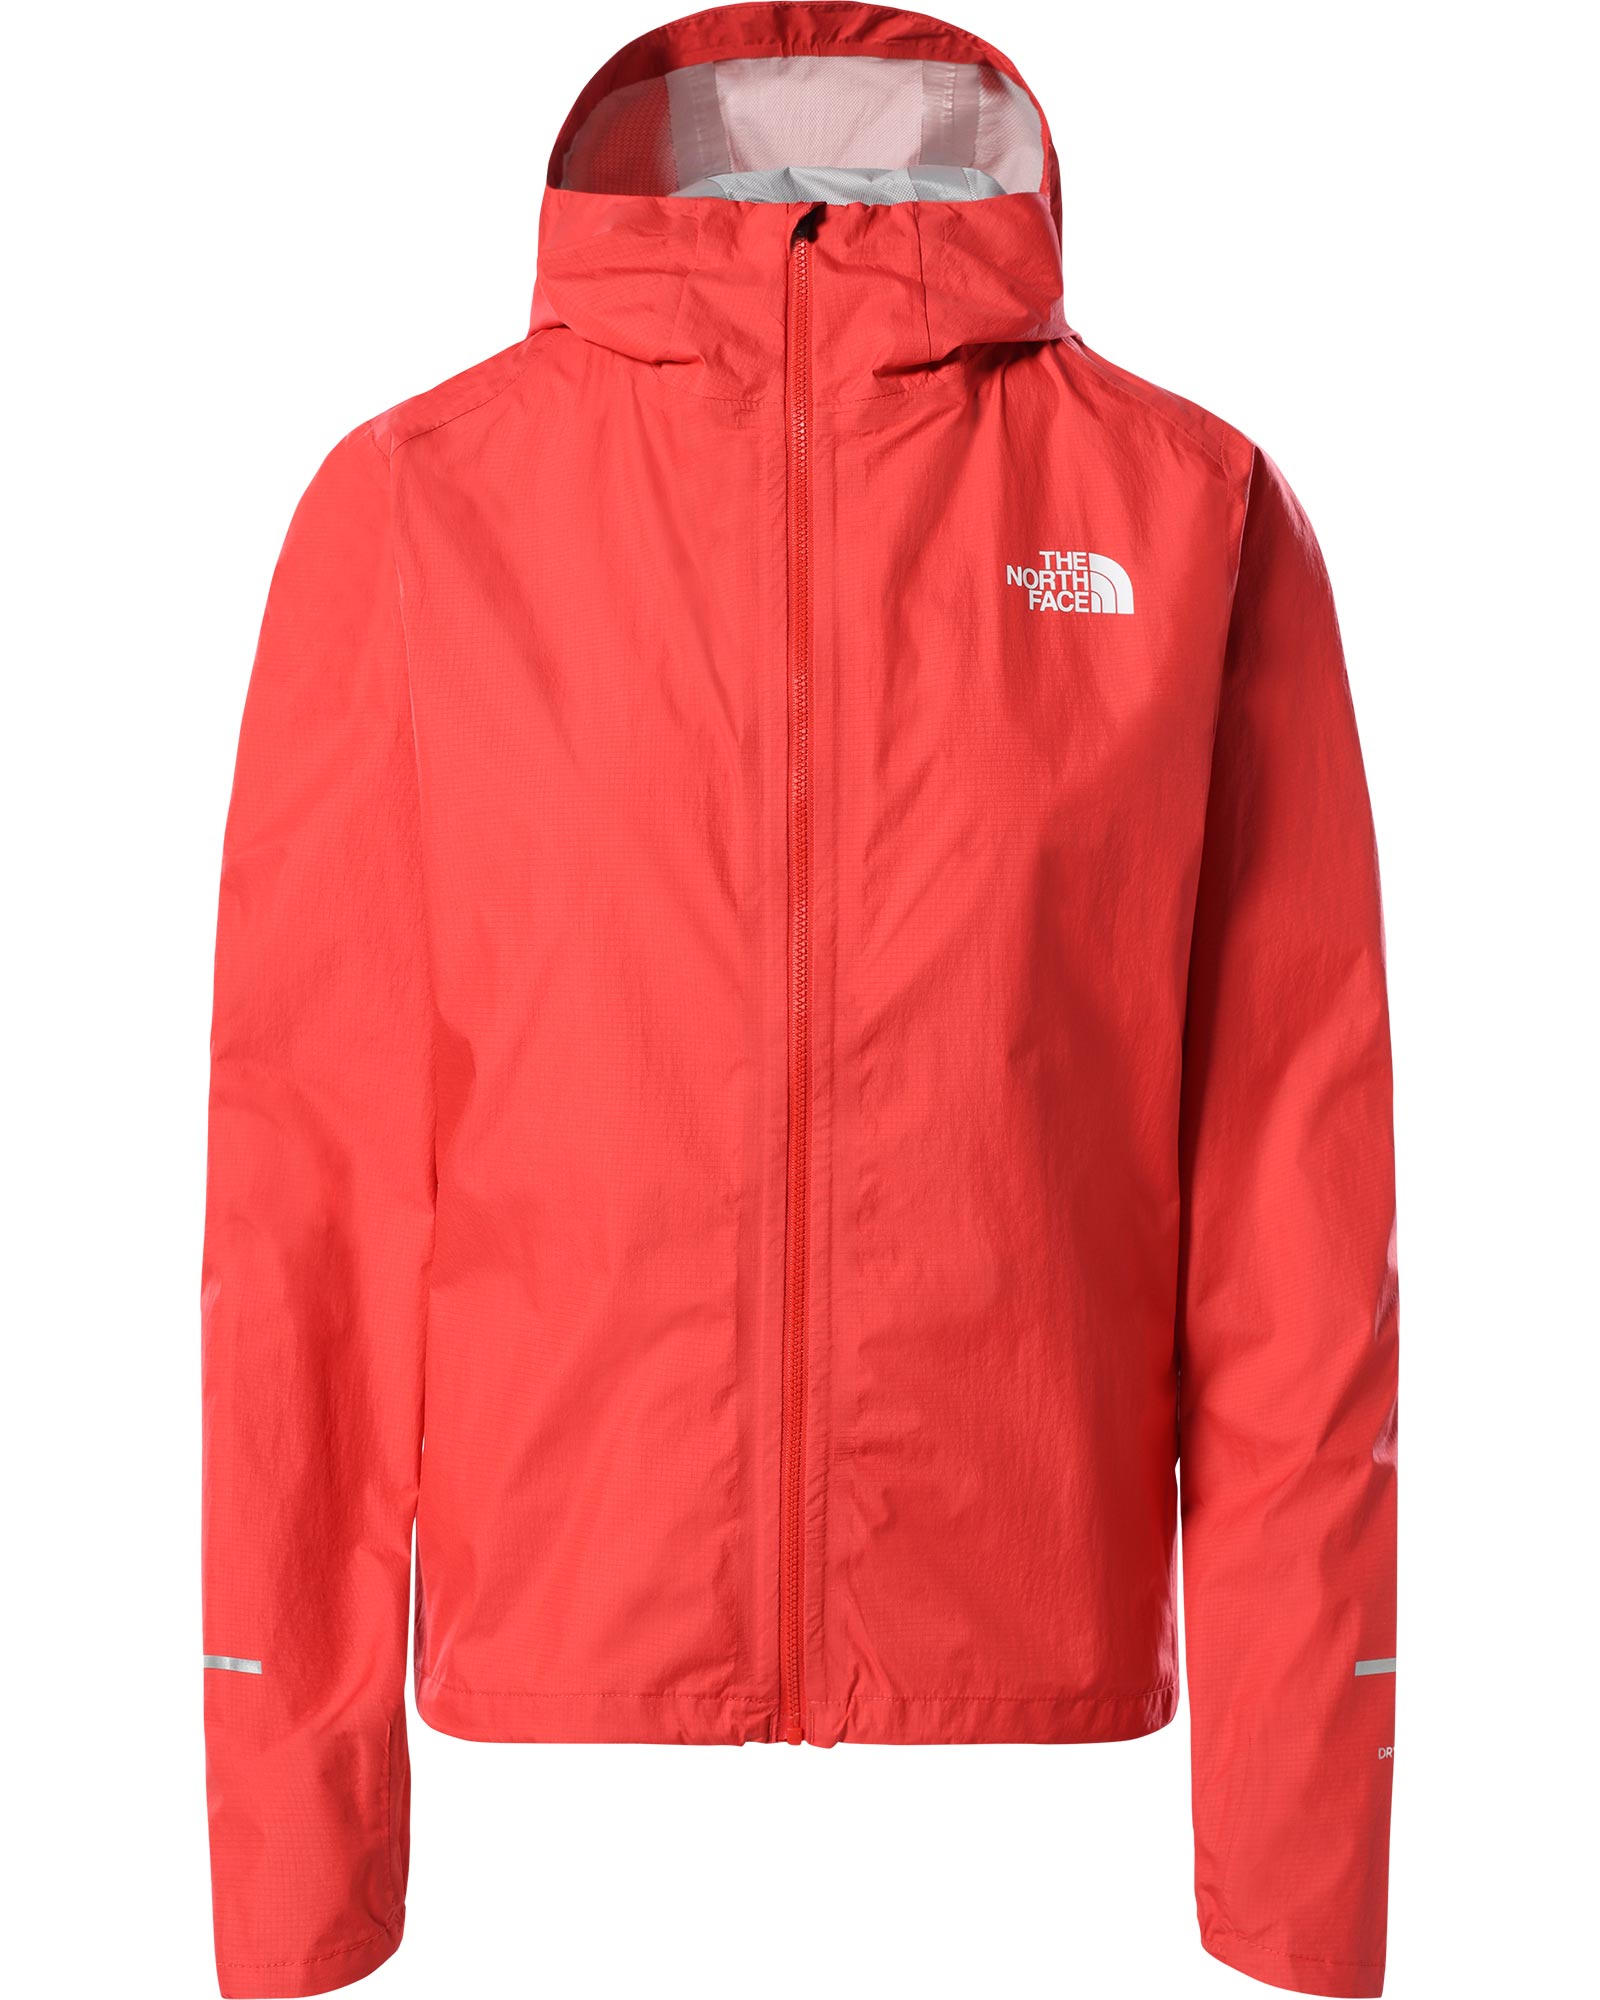 The North Face First Dawn Packable Women’s Jacket - Horizon Red S